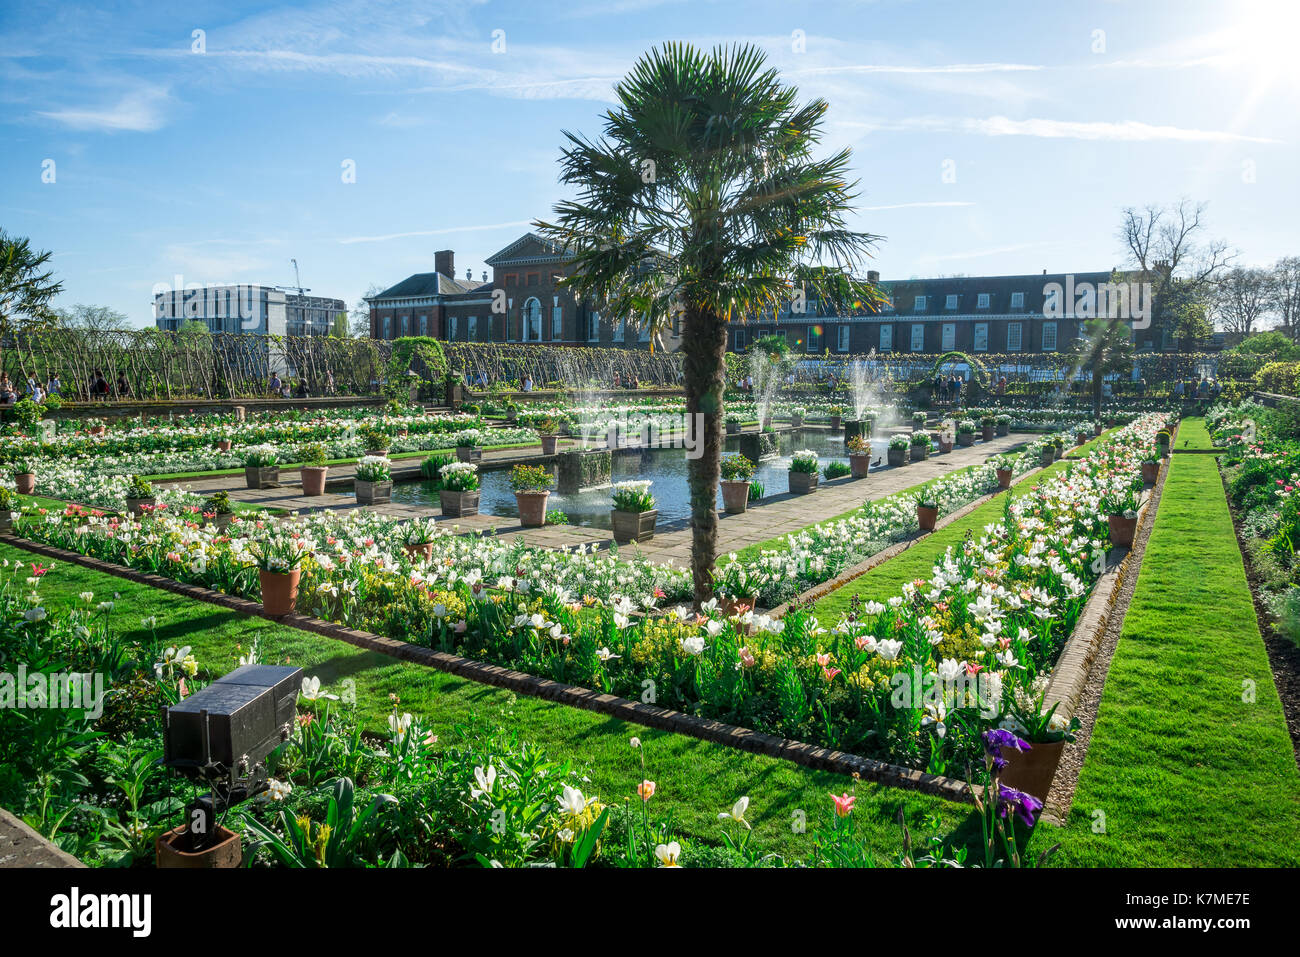 Kensington Palace Garden with fountains and blossoming flowers in spring time, London, Great Britain Stock Photo